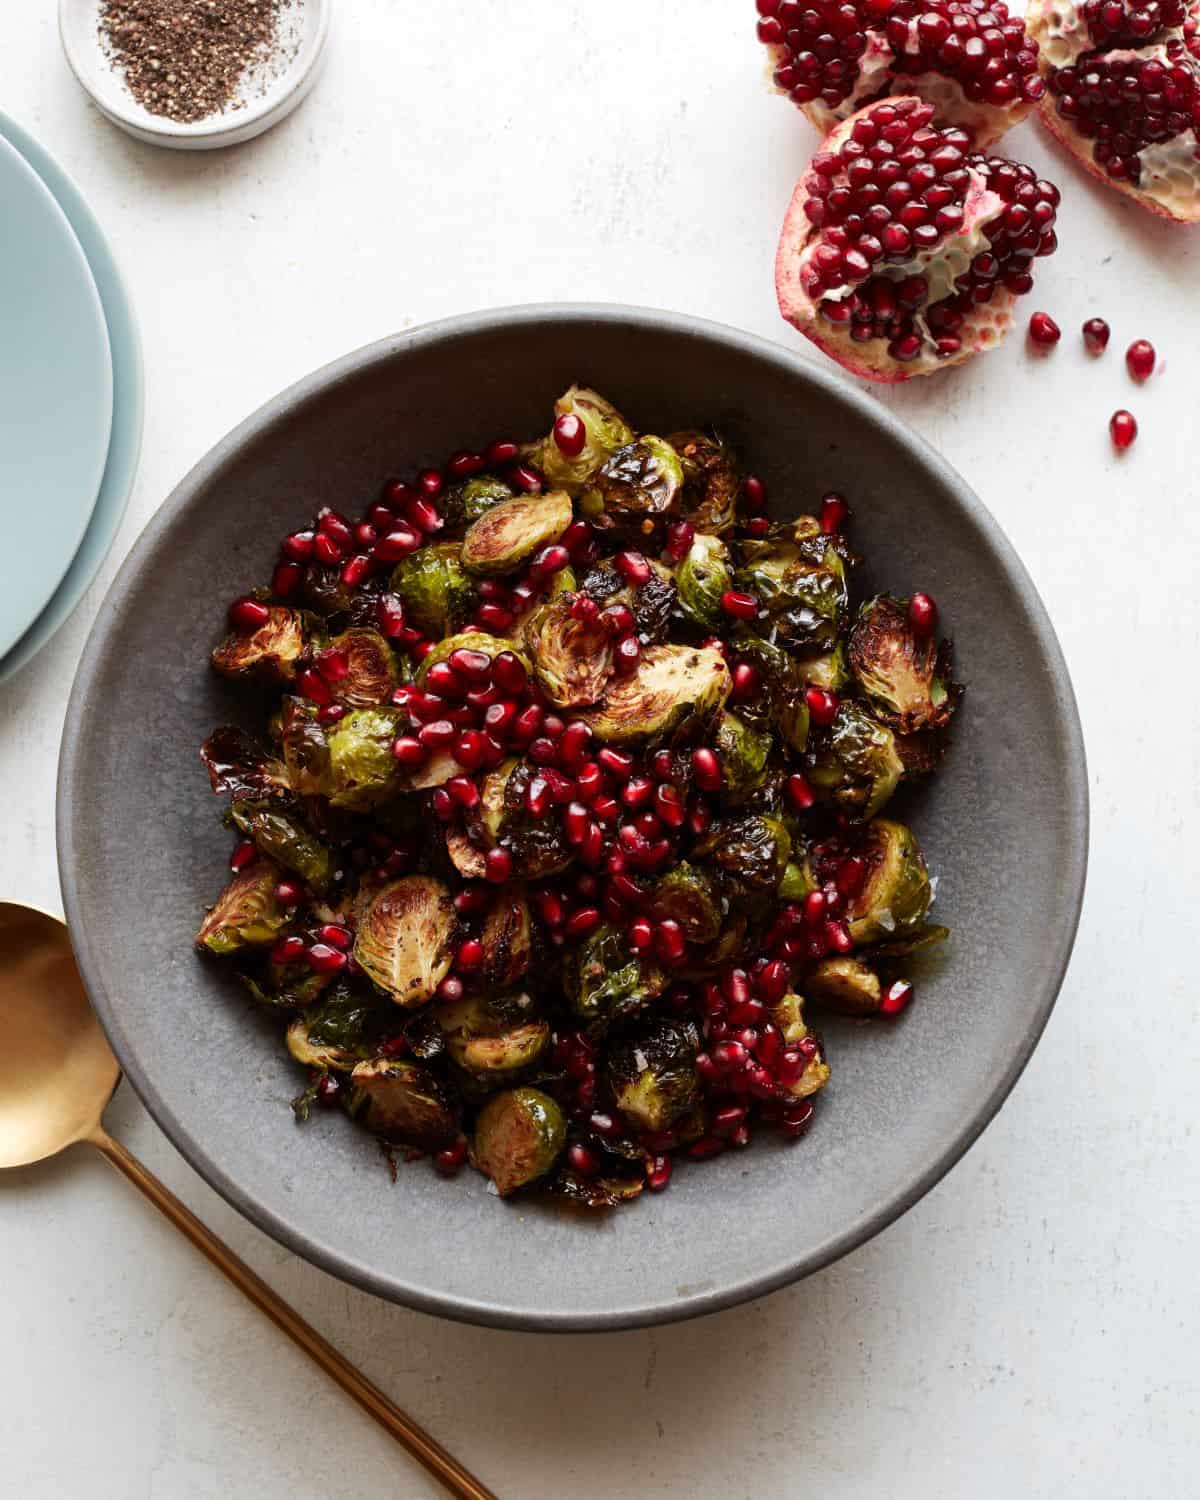 A grey shallow bowl with roasted brussels sprouts salad topped with pomegranate seeds, with a gold spoon on its side, pomegranate quarters and plates next to it.